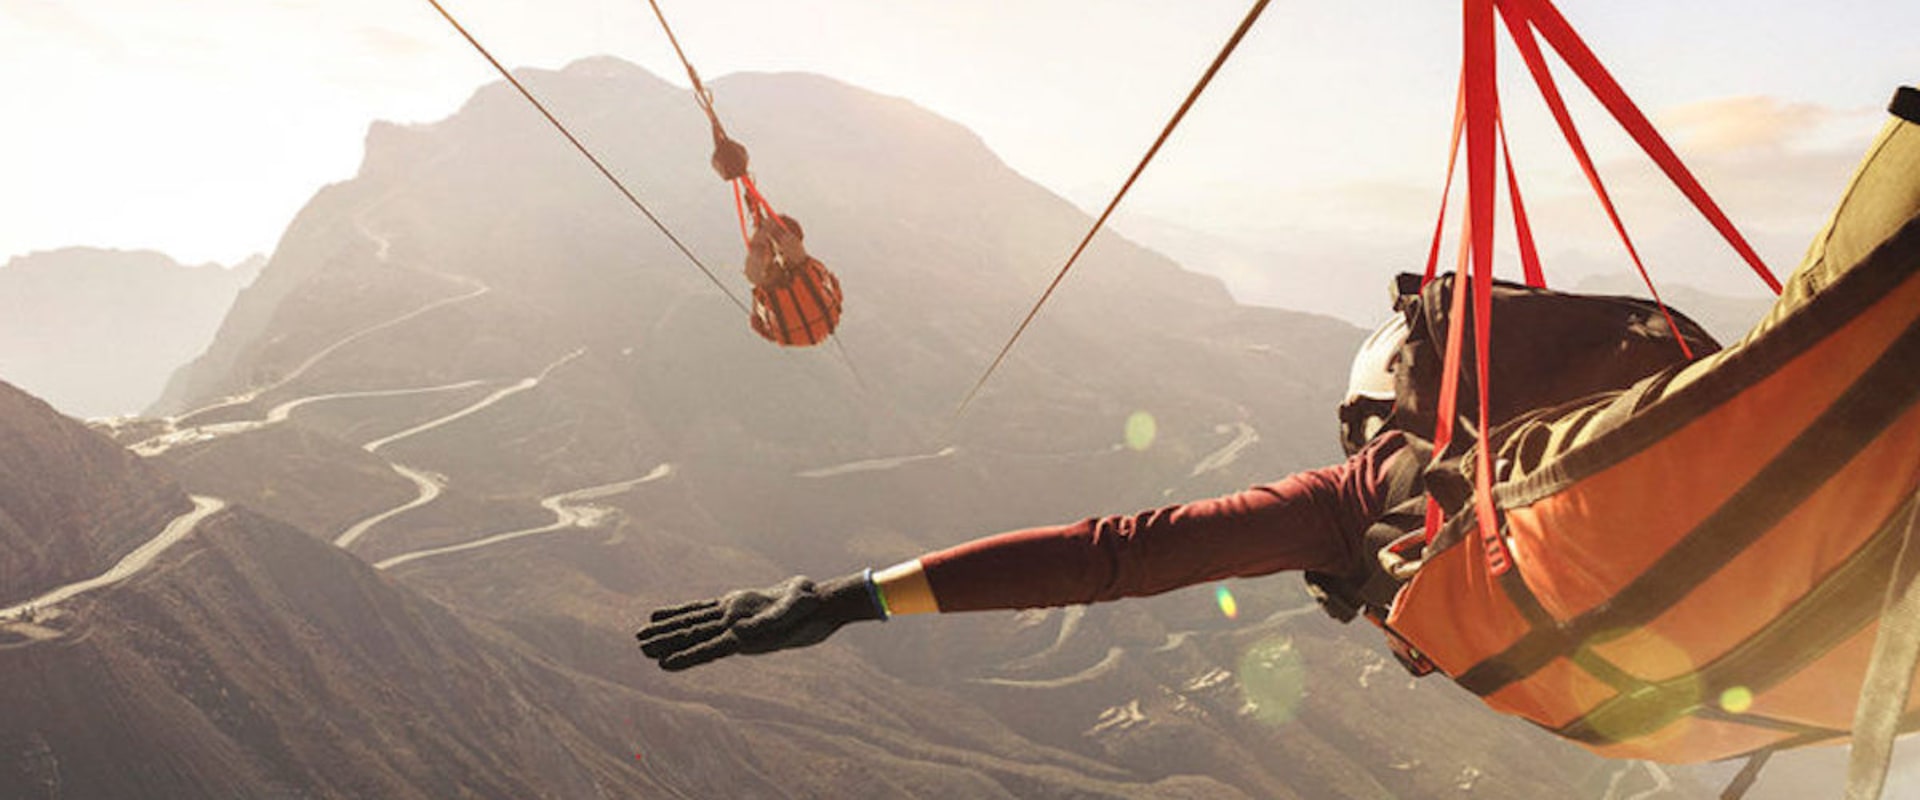 What are the best ziplines in the world?